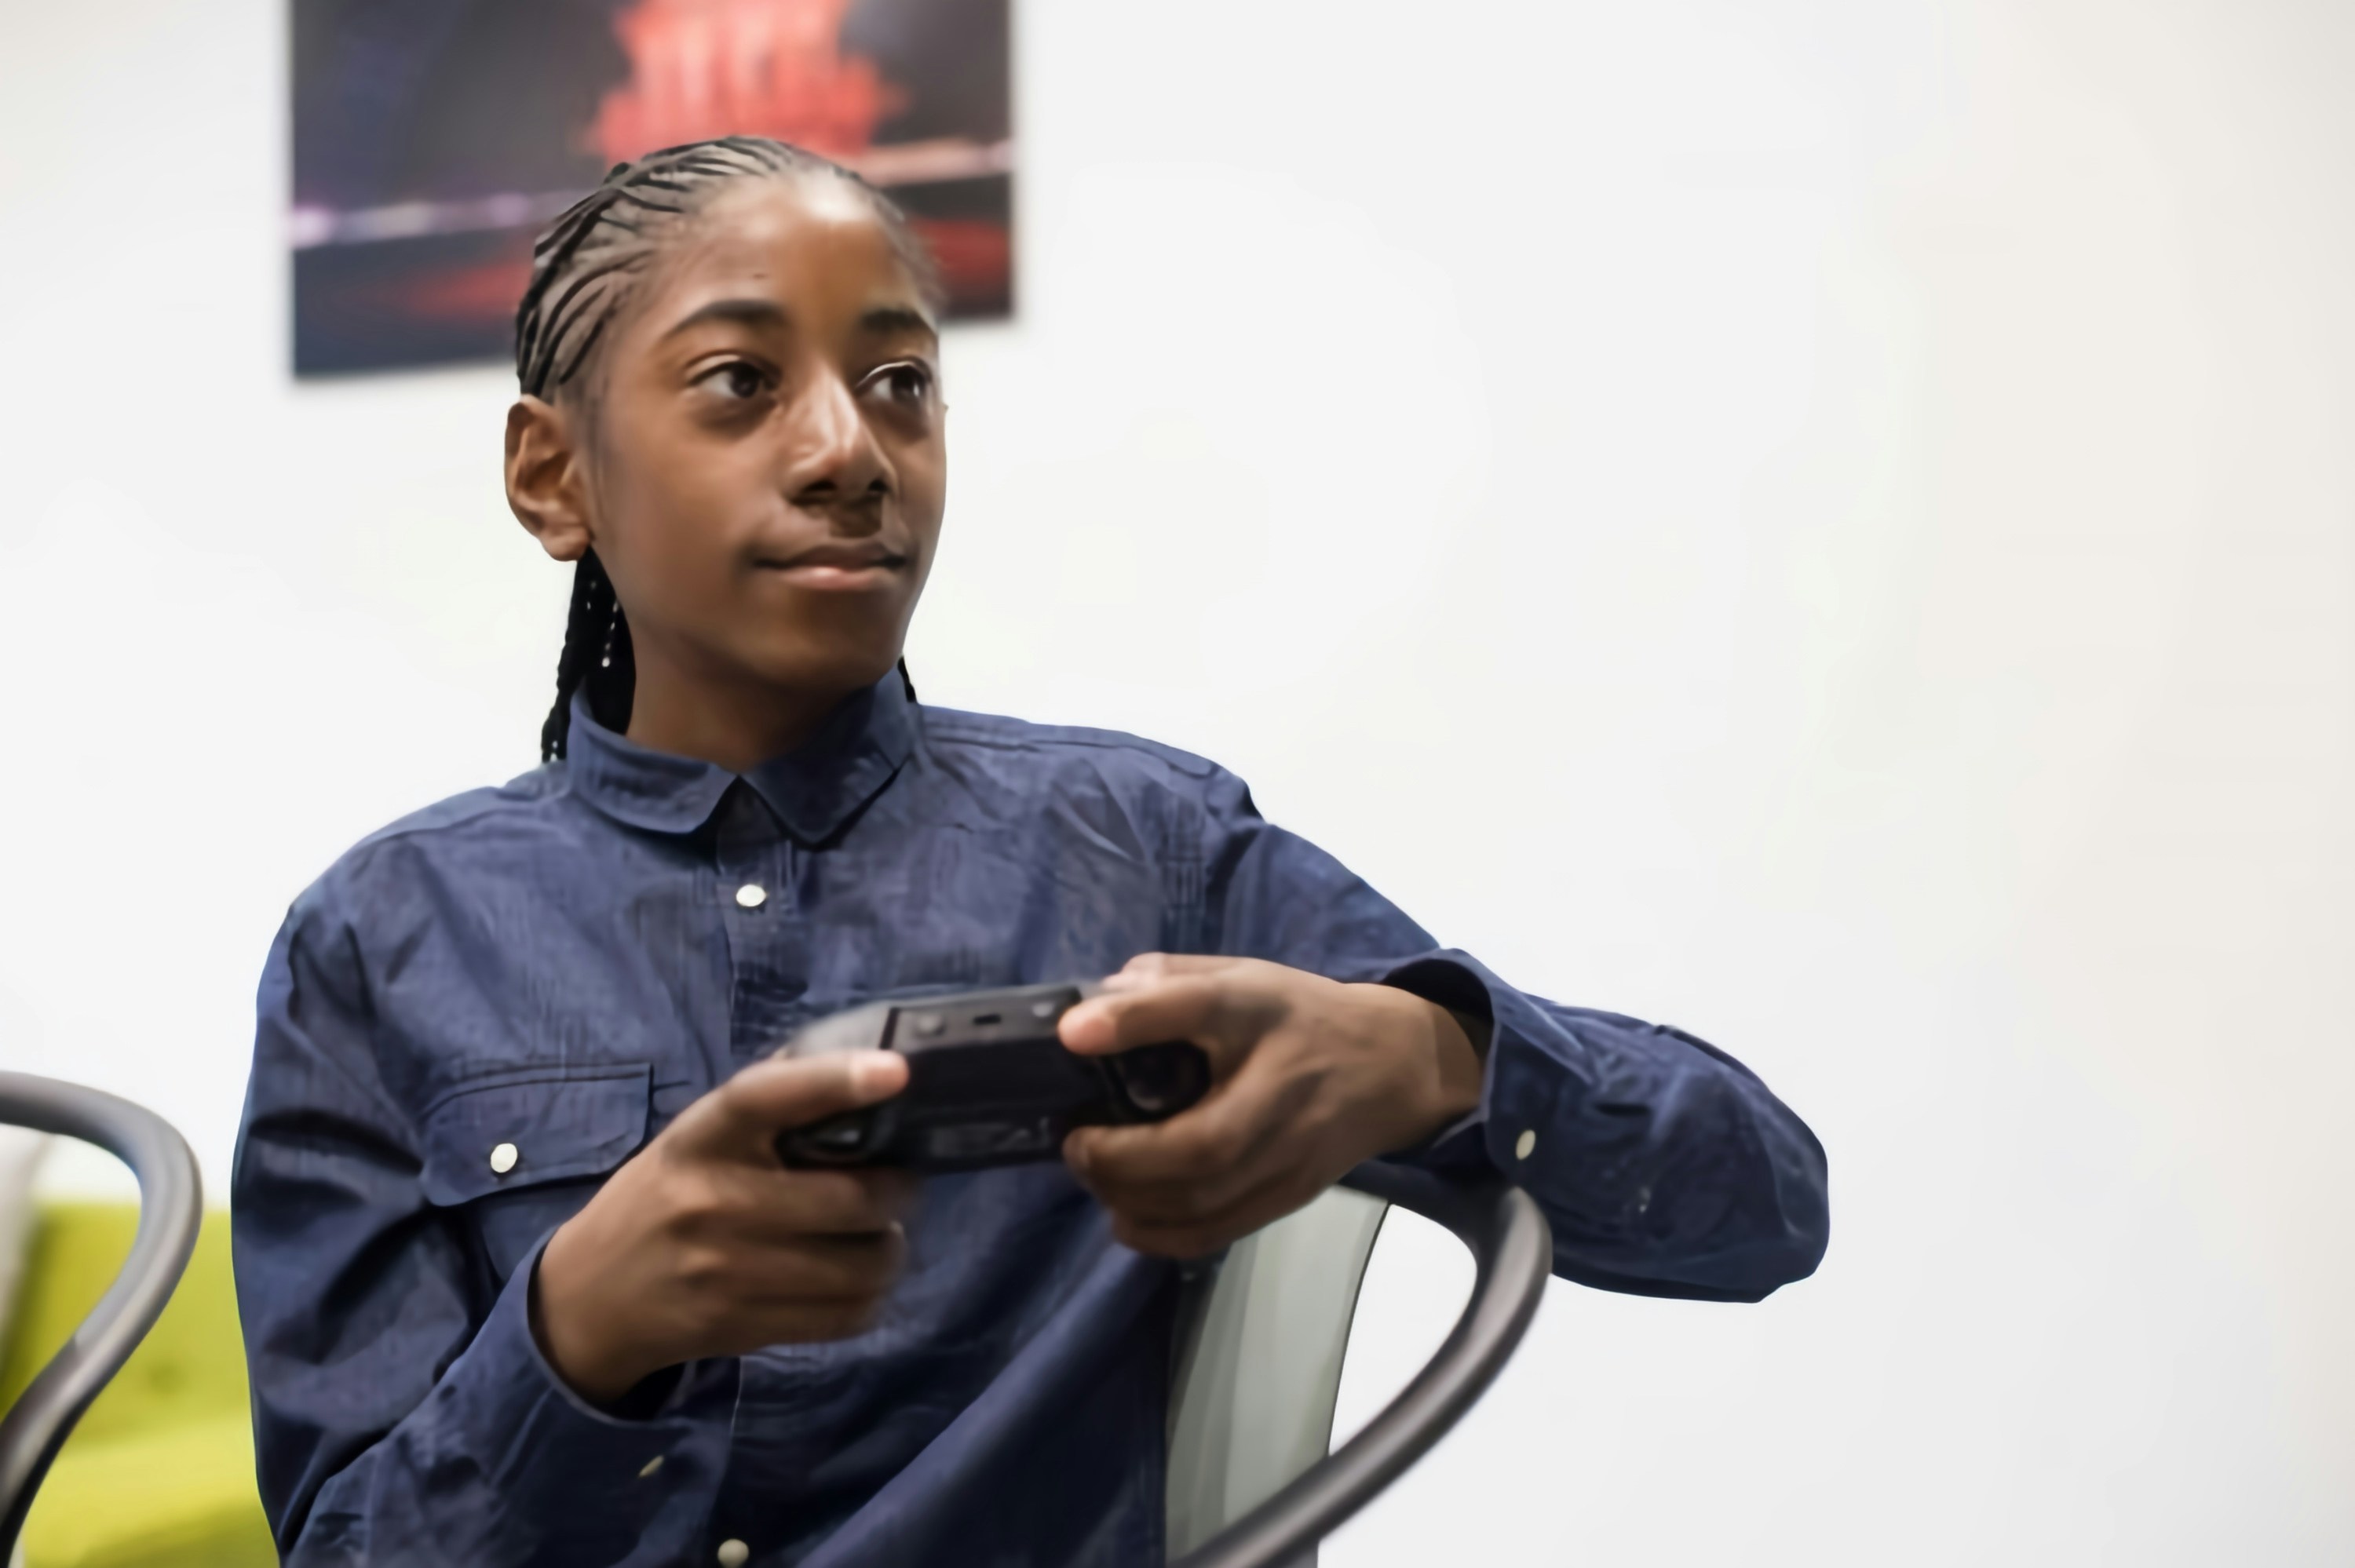 Young person on computer handset